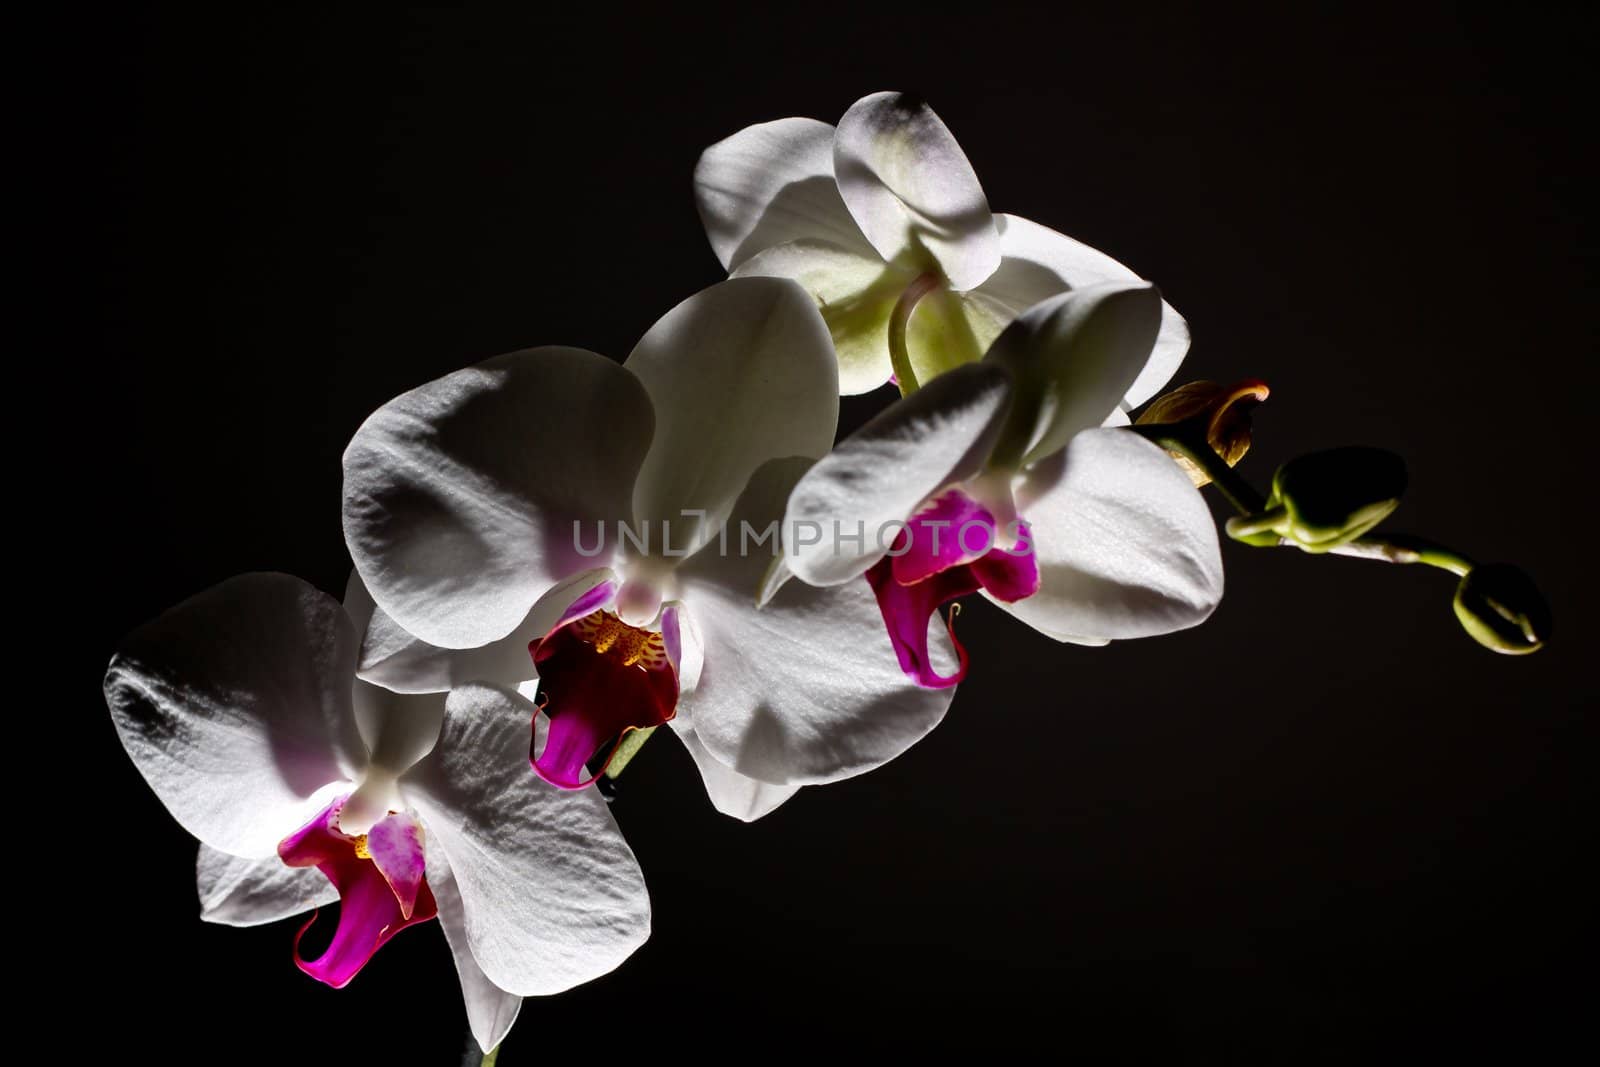 image shows orchidea isolated on a dark background